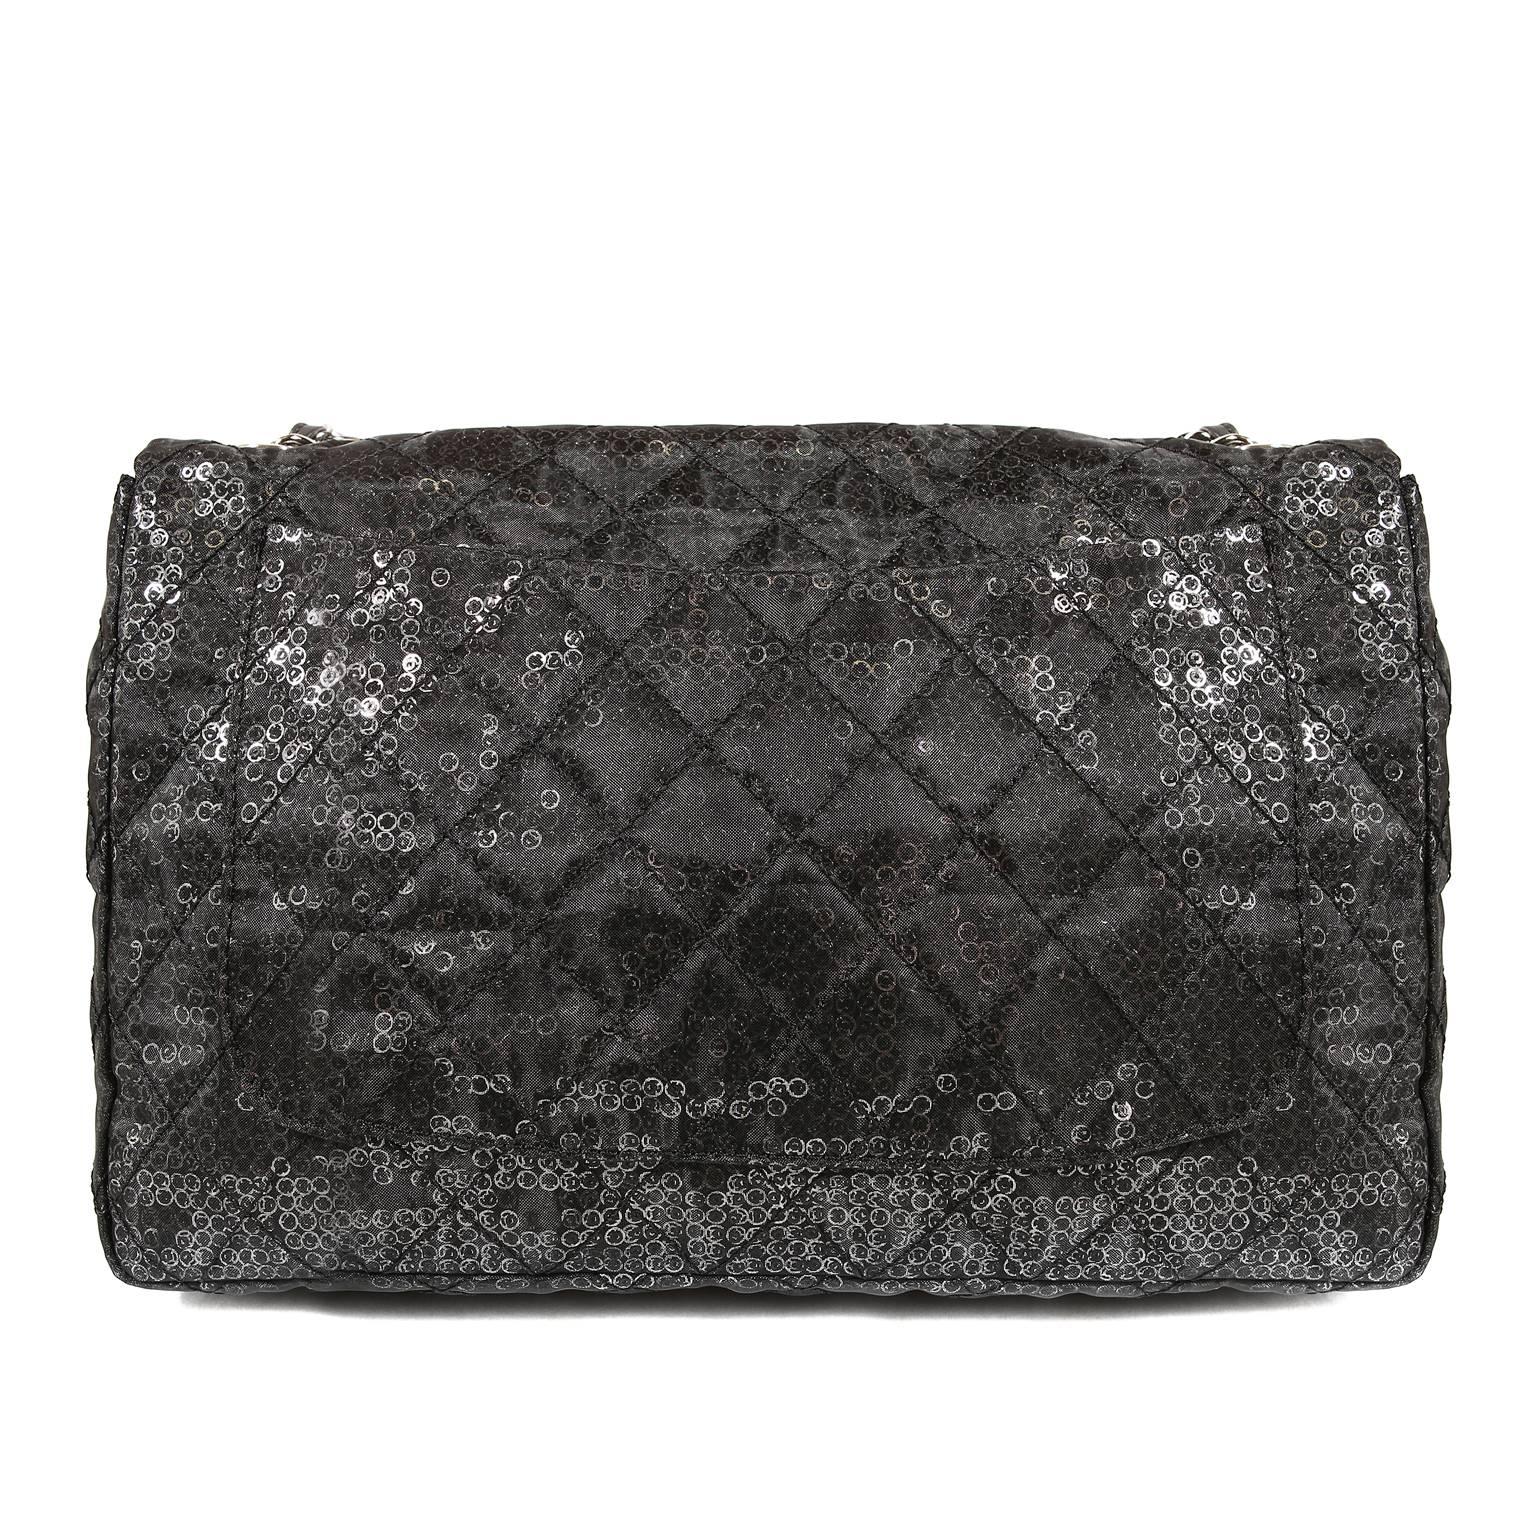 Chanel Hidden Sequins Jumbo Classic Flap Bag- Pristine, Unworn Condition. Special Edition.
The classic silhouette is texturally and visually unique; an imperative acquisition for collectors. 
Black mesh fabric is quilted in signature Chanel diamond